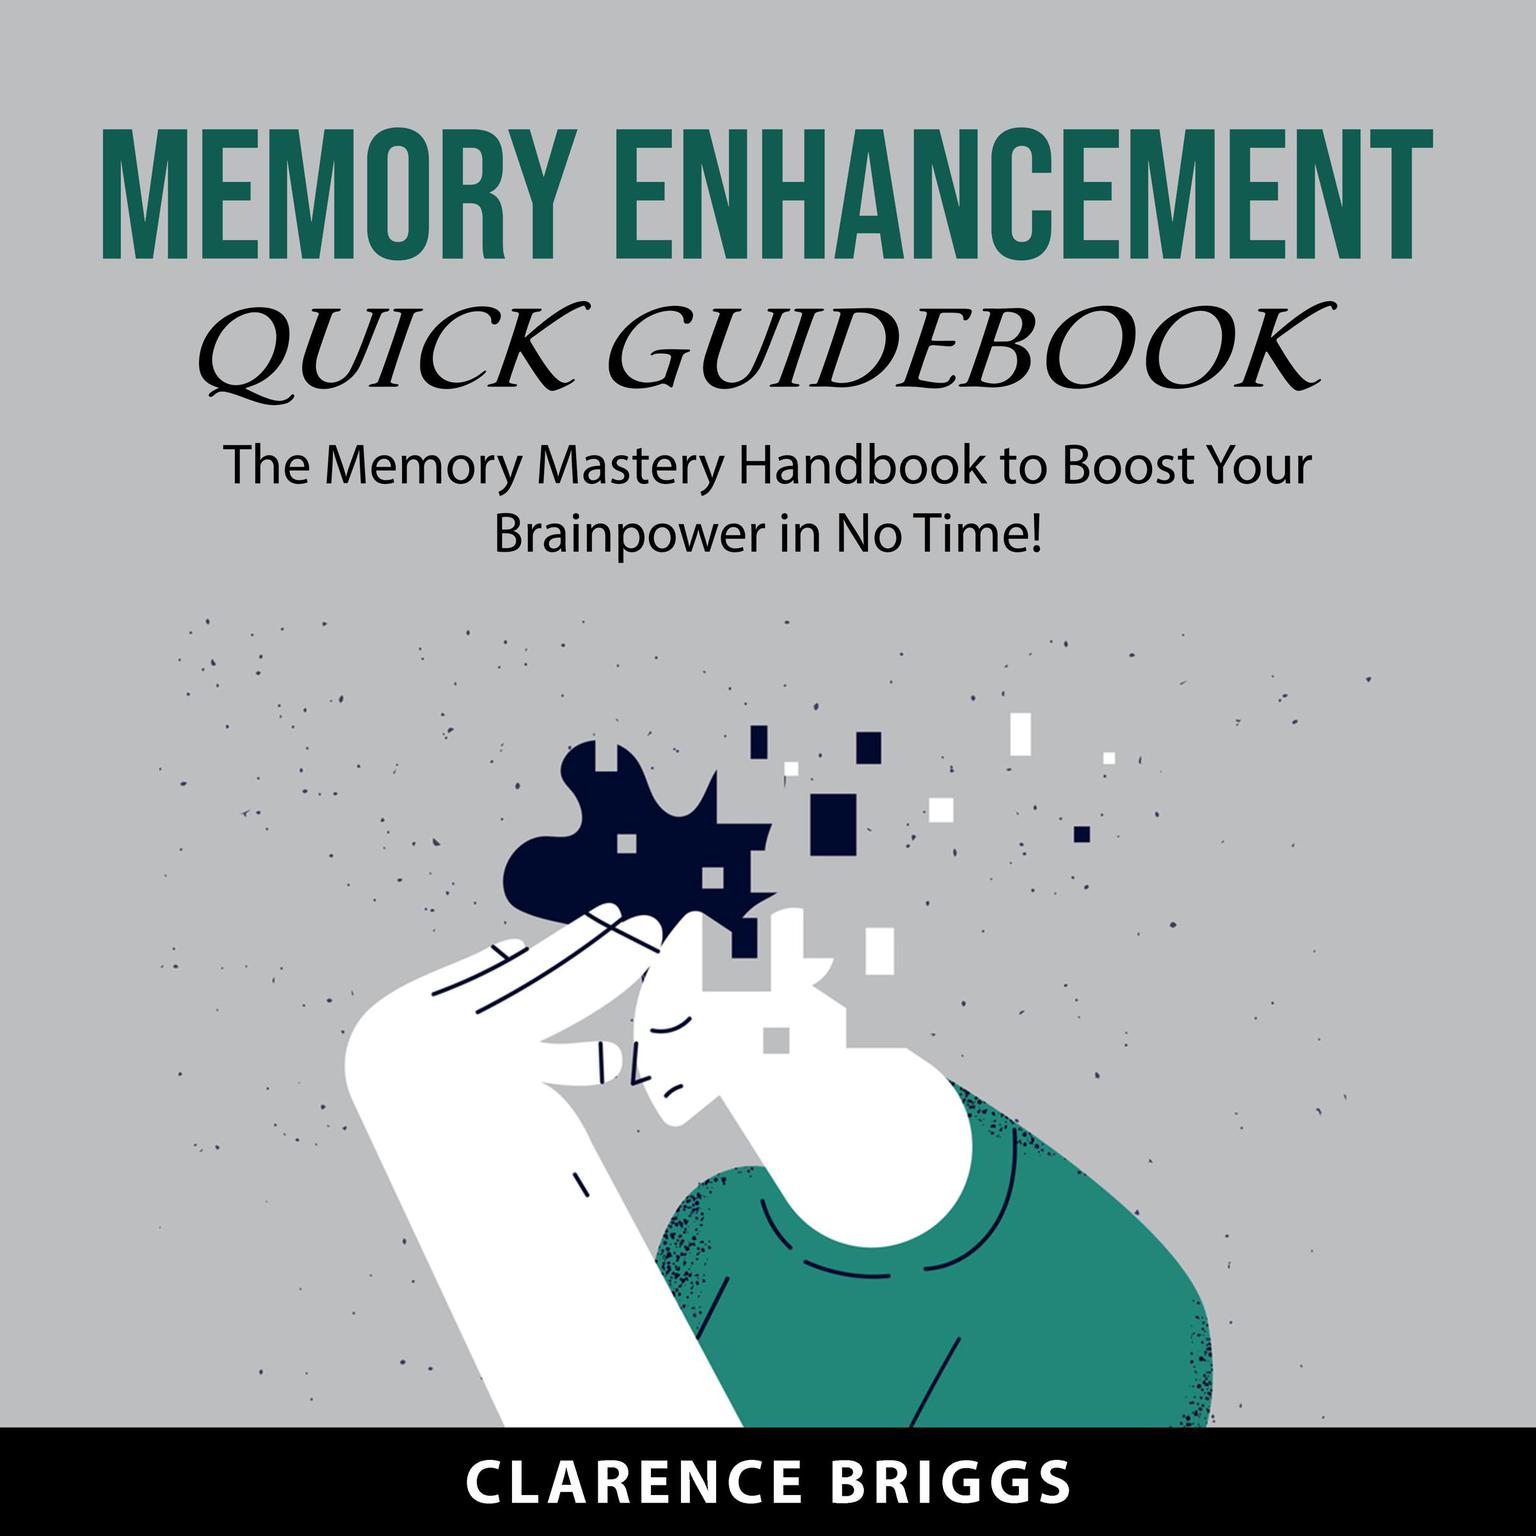 Memory Enhancement Quick Guidebook Audiobook, by Clarence Briggs